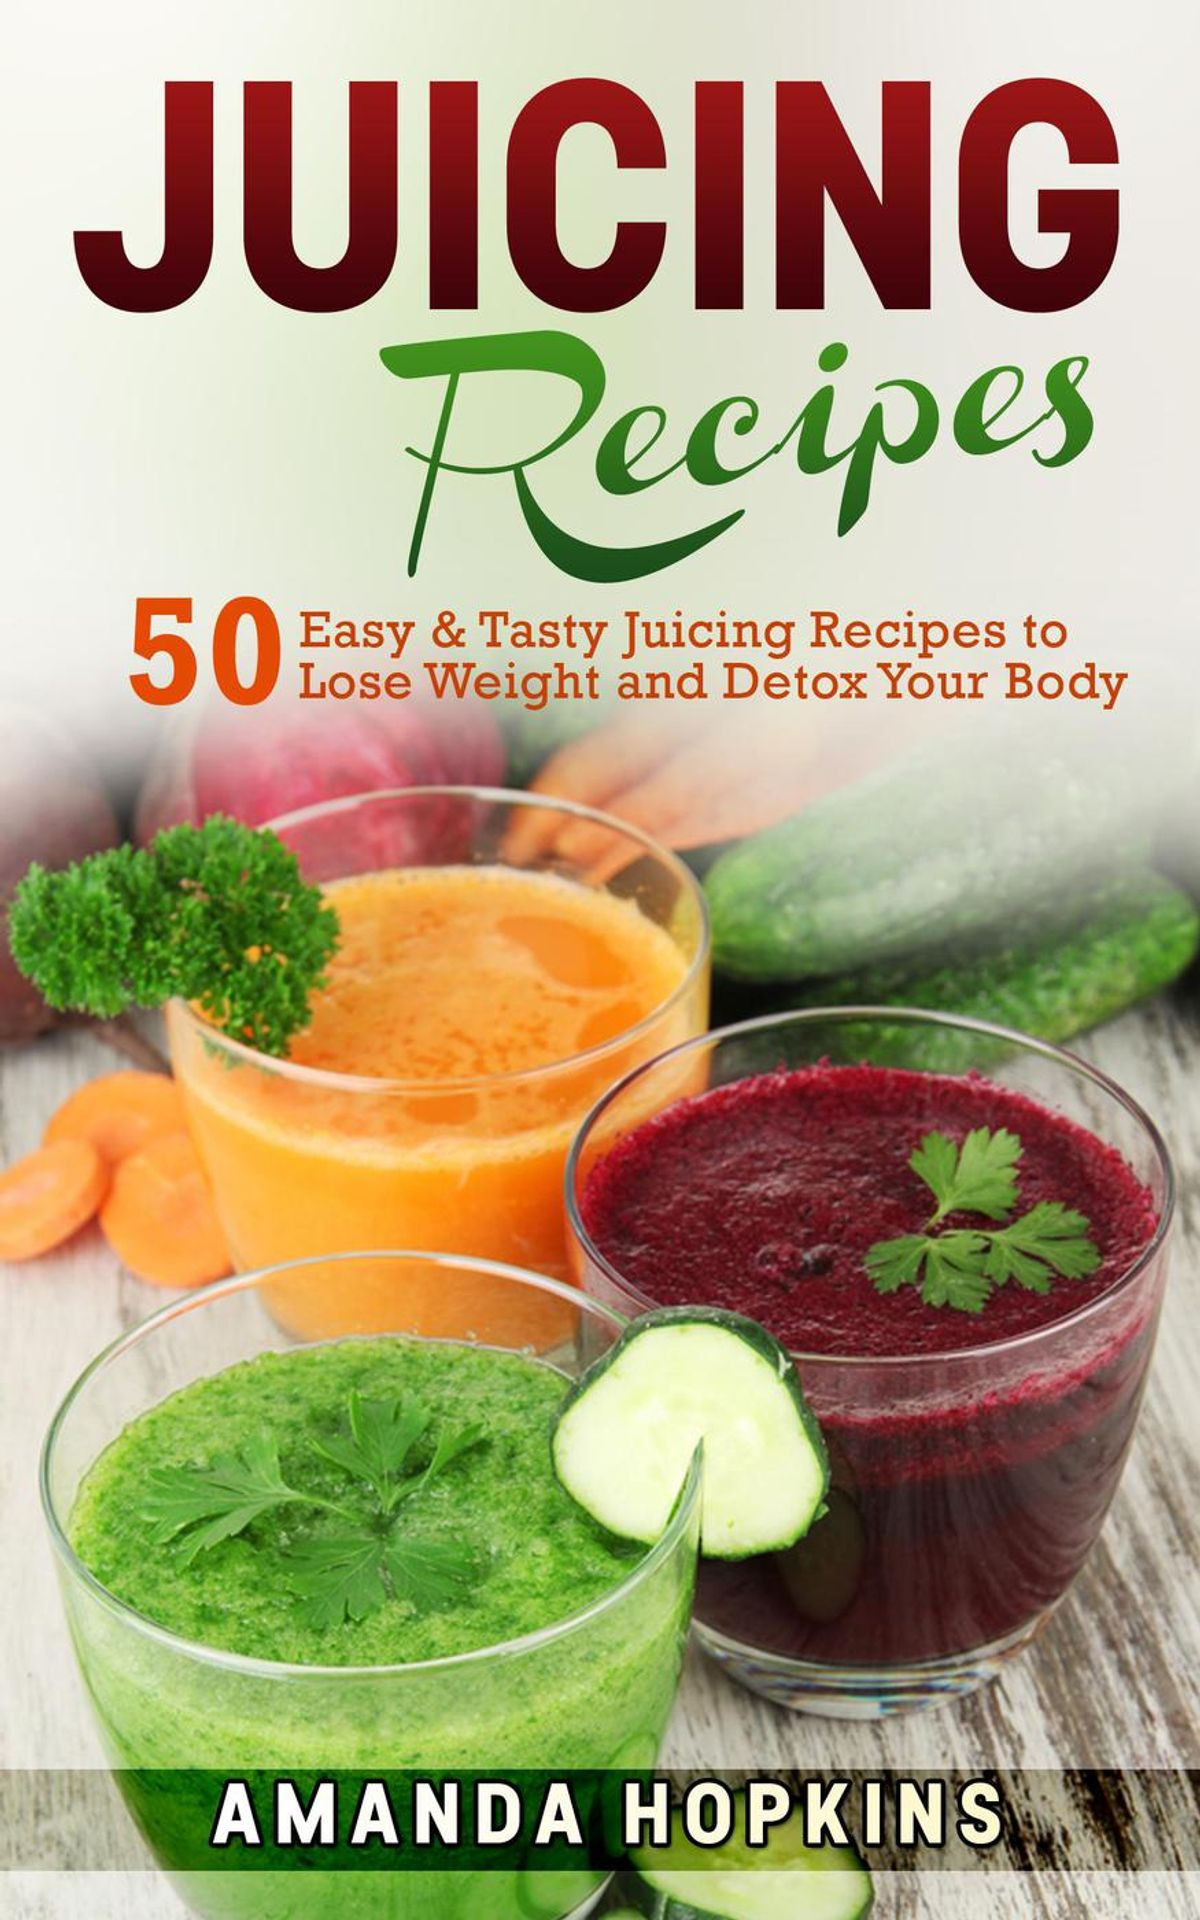 Easy Juicing Recipes For Weight Loss
 Juicing Recipes 50 Easy & Tasty Juicing Recipes to Lose